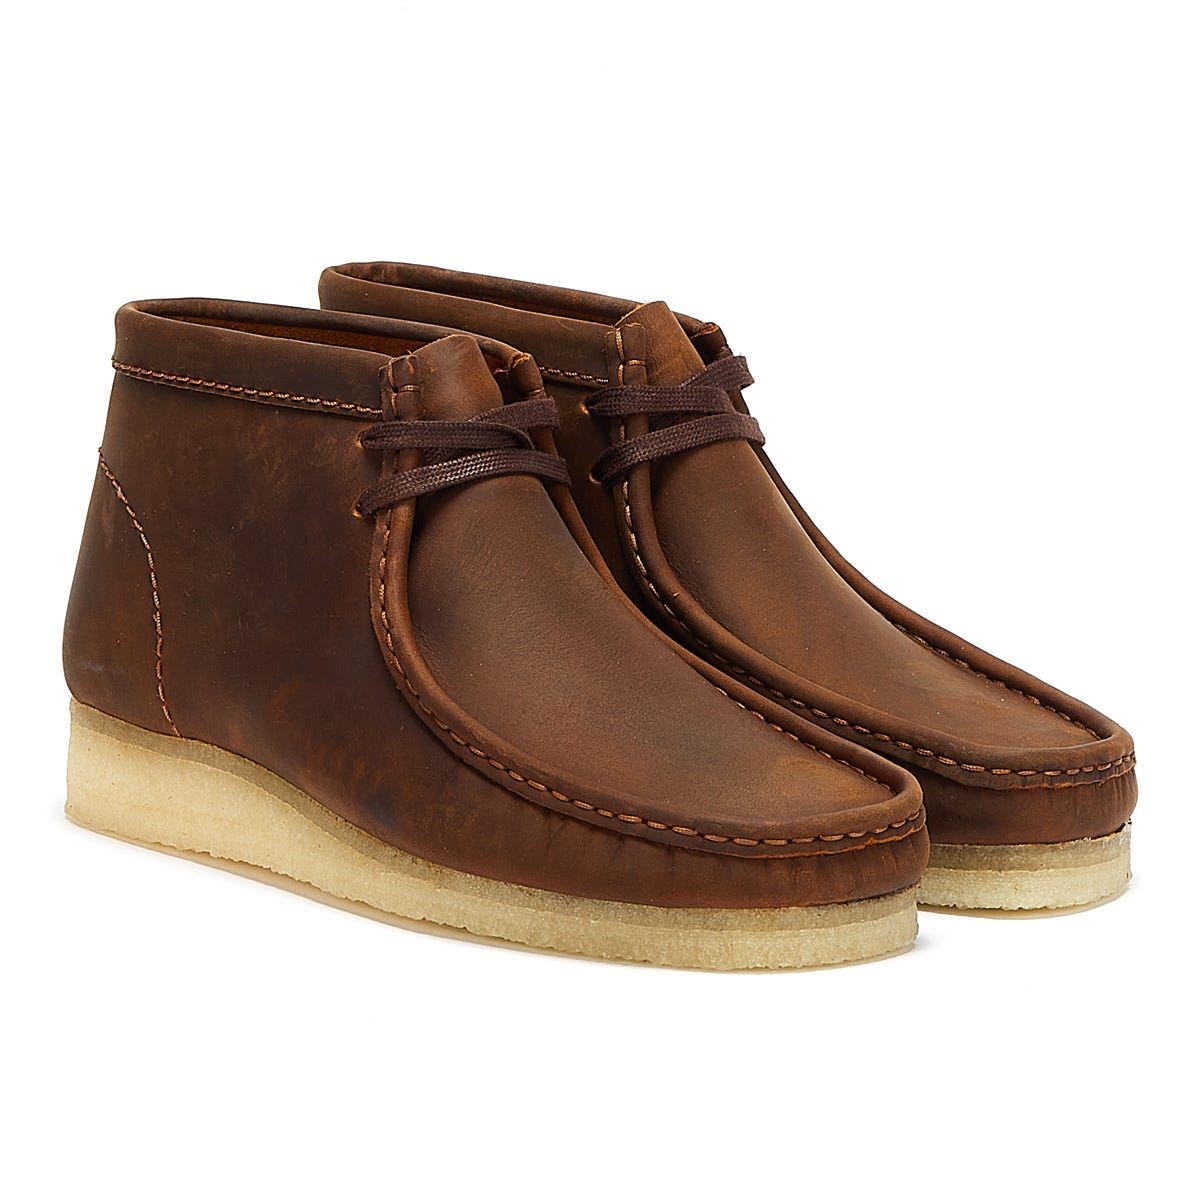 Clarks Wallabee Beeswax Men’s Brown Boots